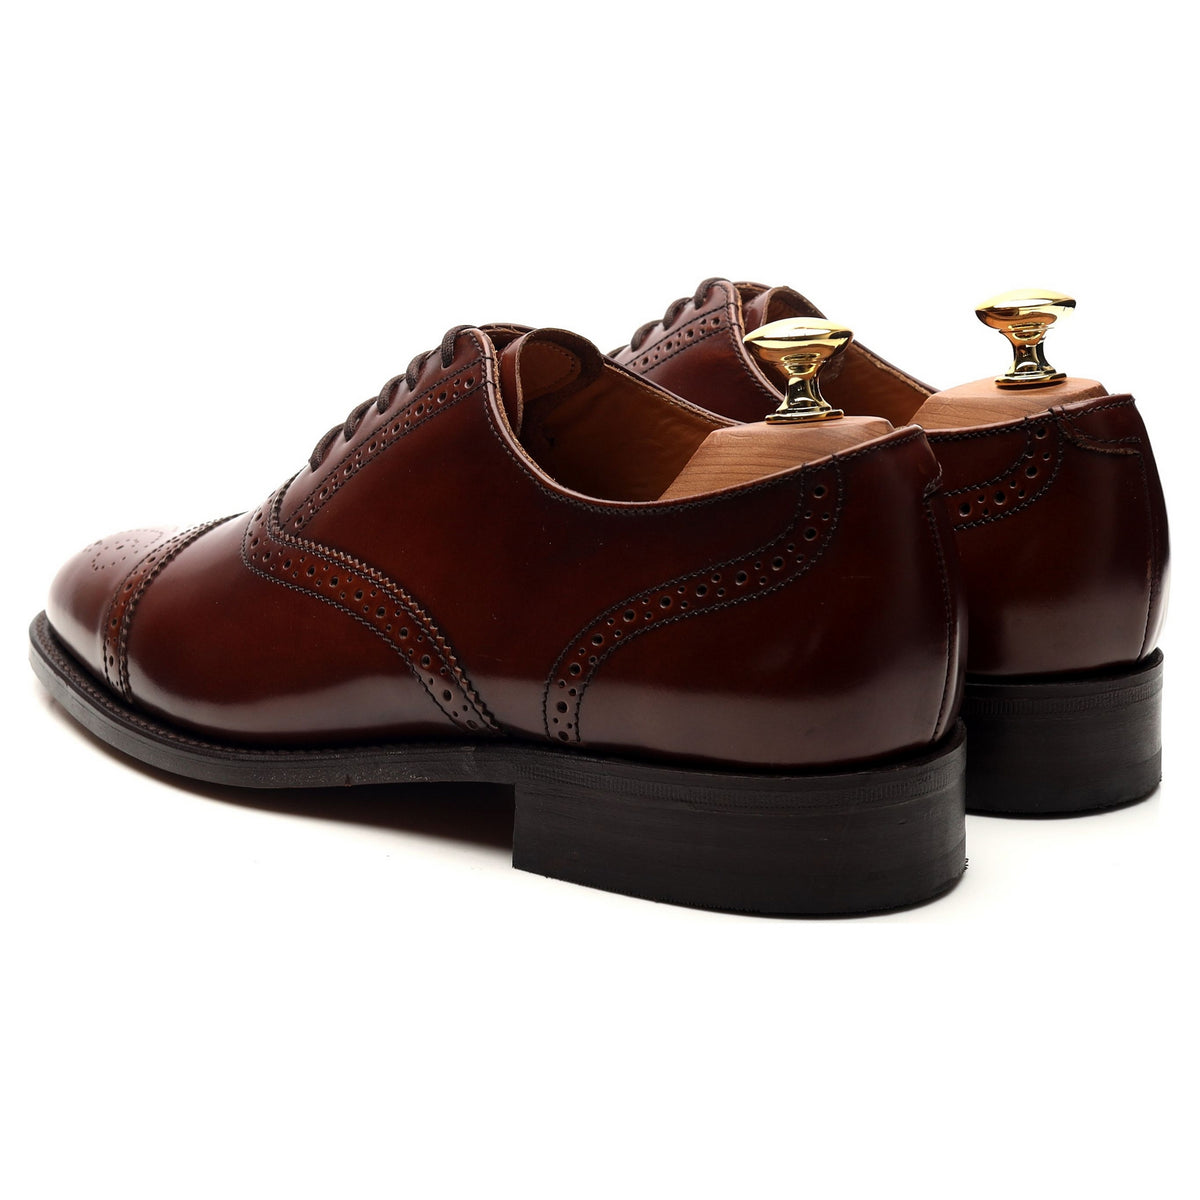 Brown Leather Oxford Brogues UK 6.5 G